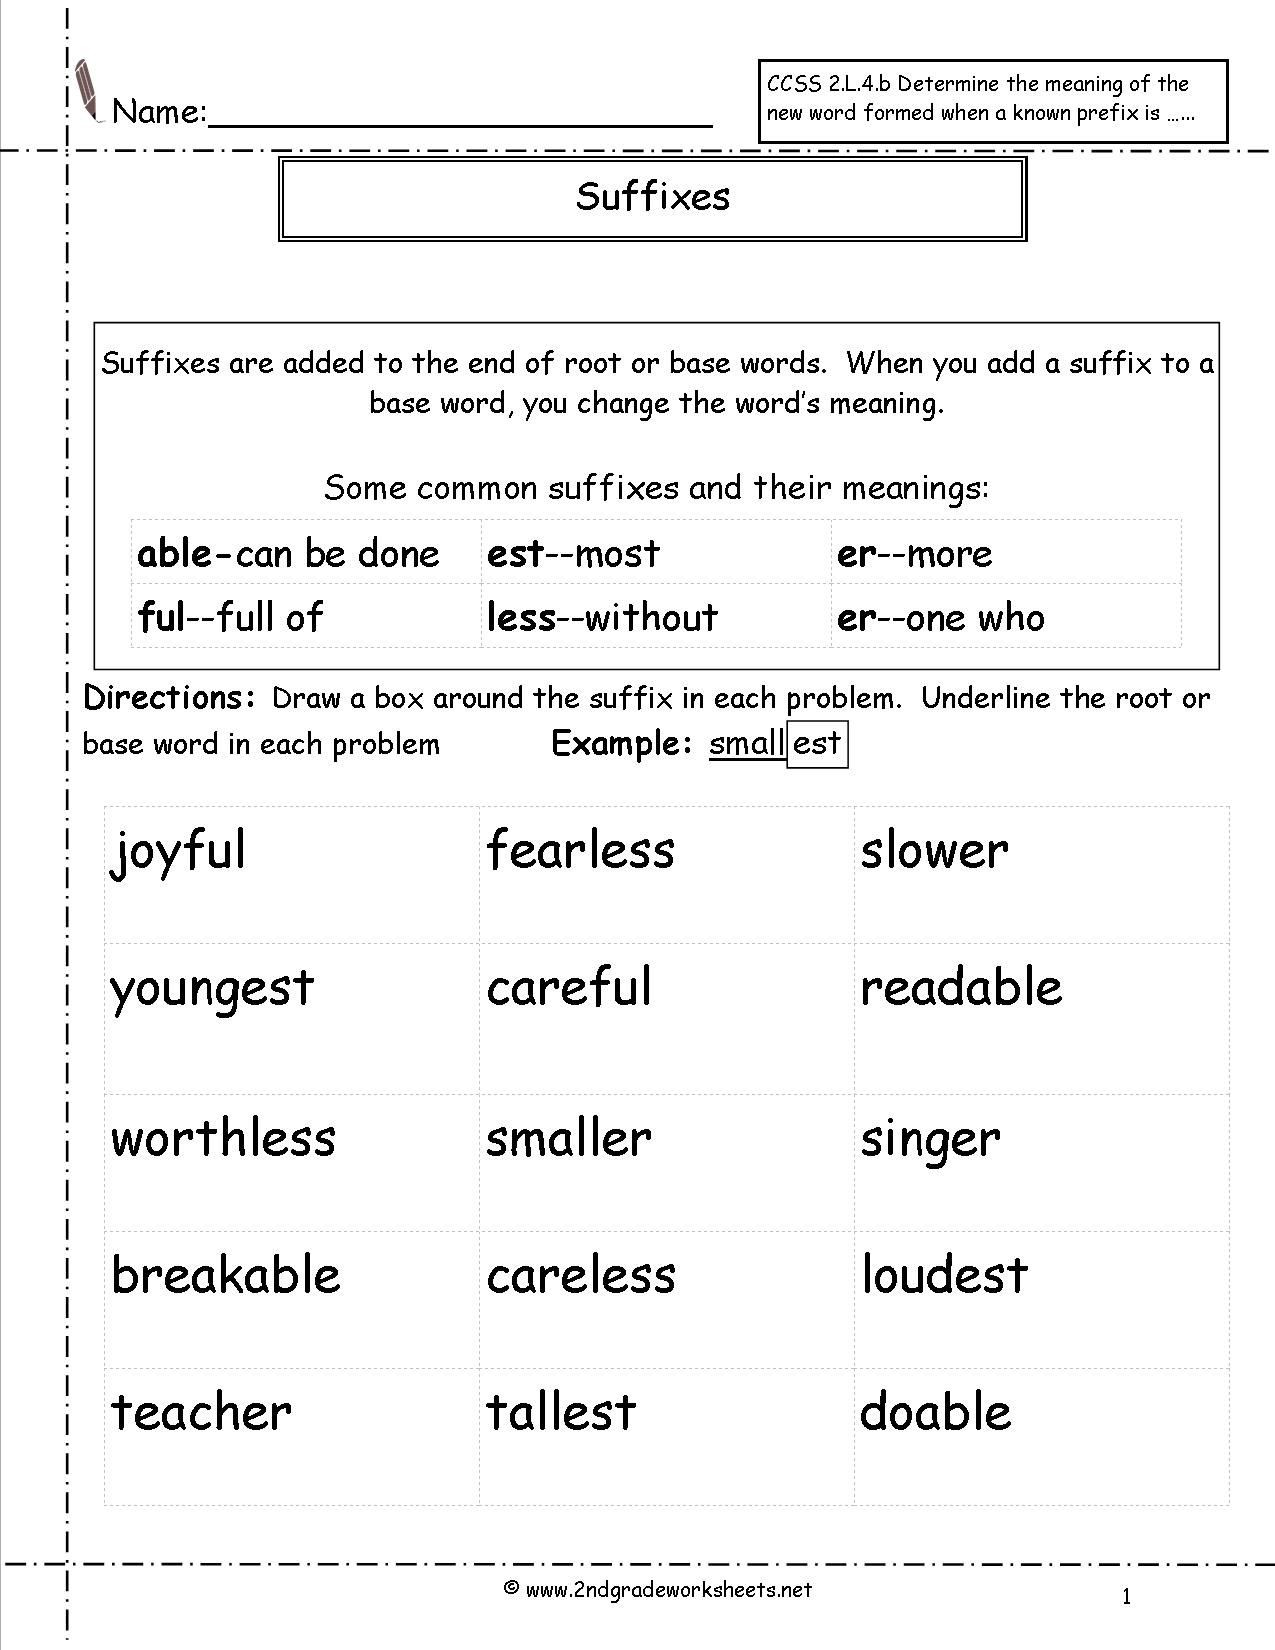 Suffix Worksheets for 4th Grade 41 Innovative Prefix Worksheets for You